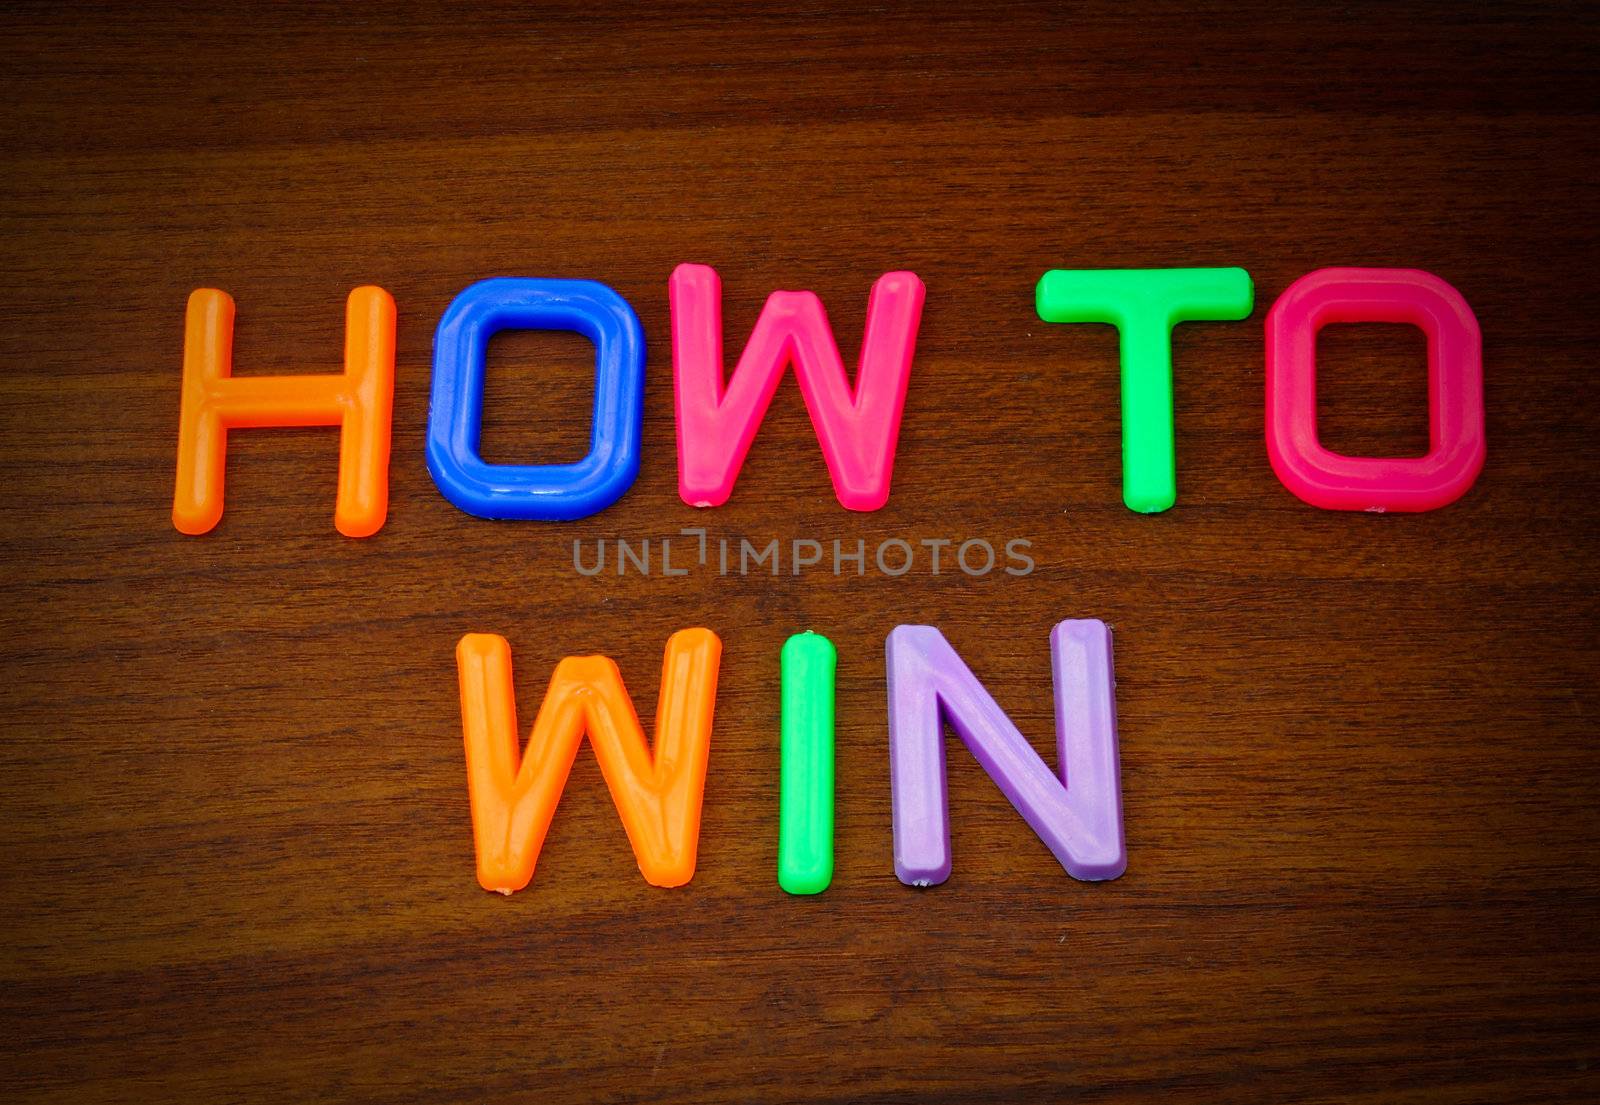 How to win in colorful toy letters on wood background by nuchylee